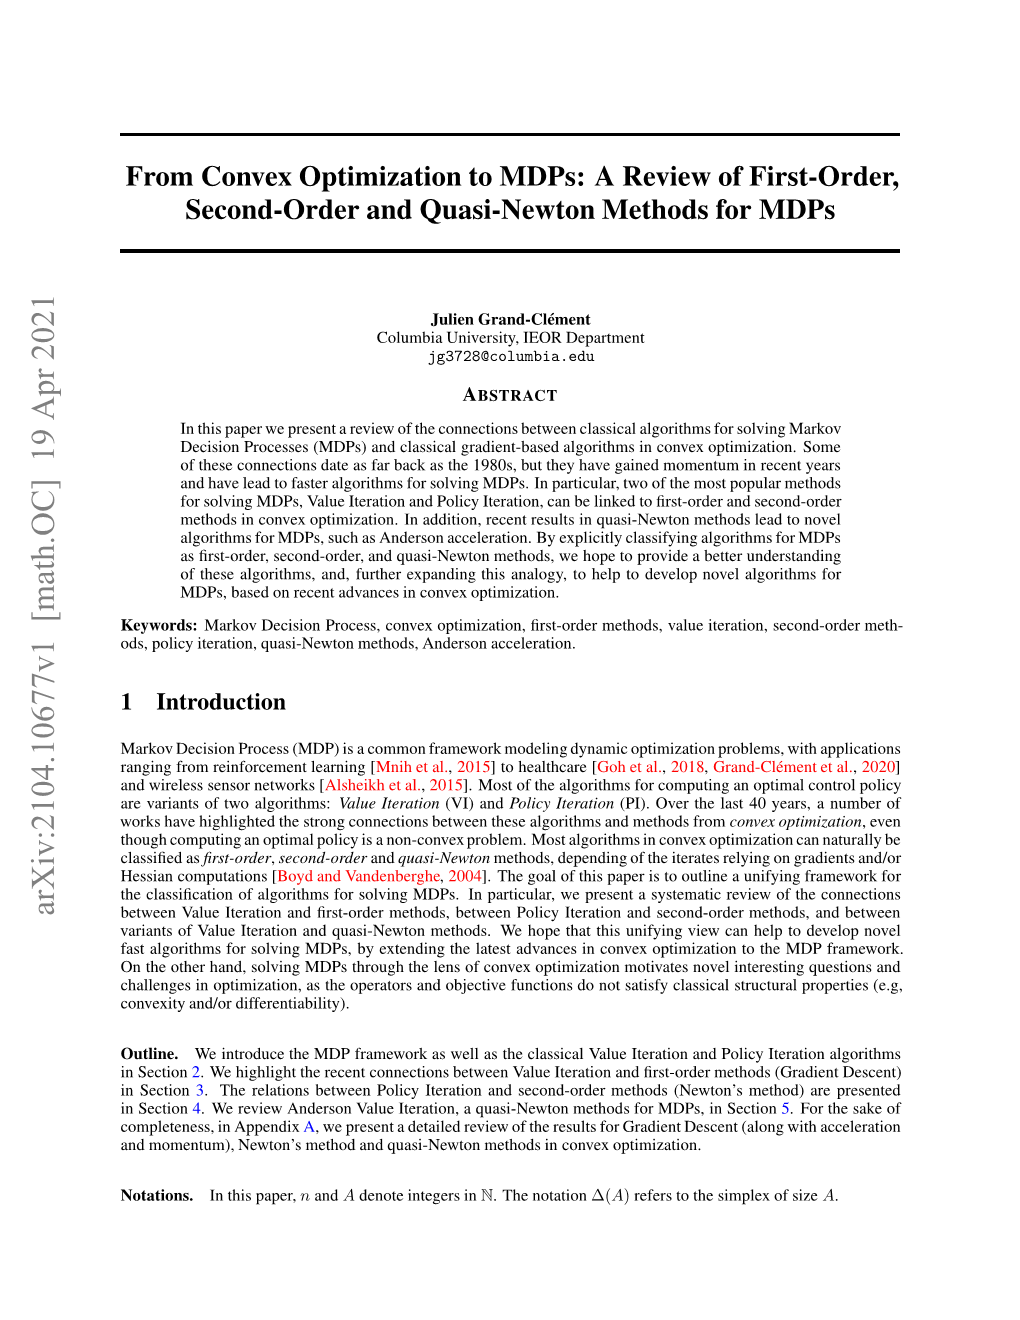 From Convex Optimization to Mdps: a Review of First-Order, Second